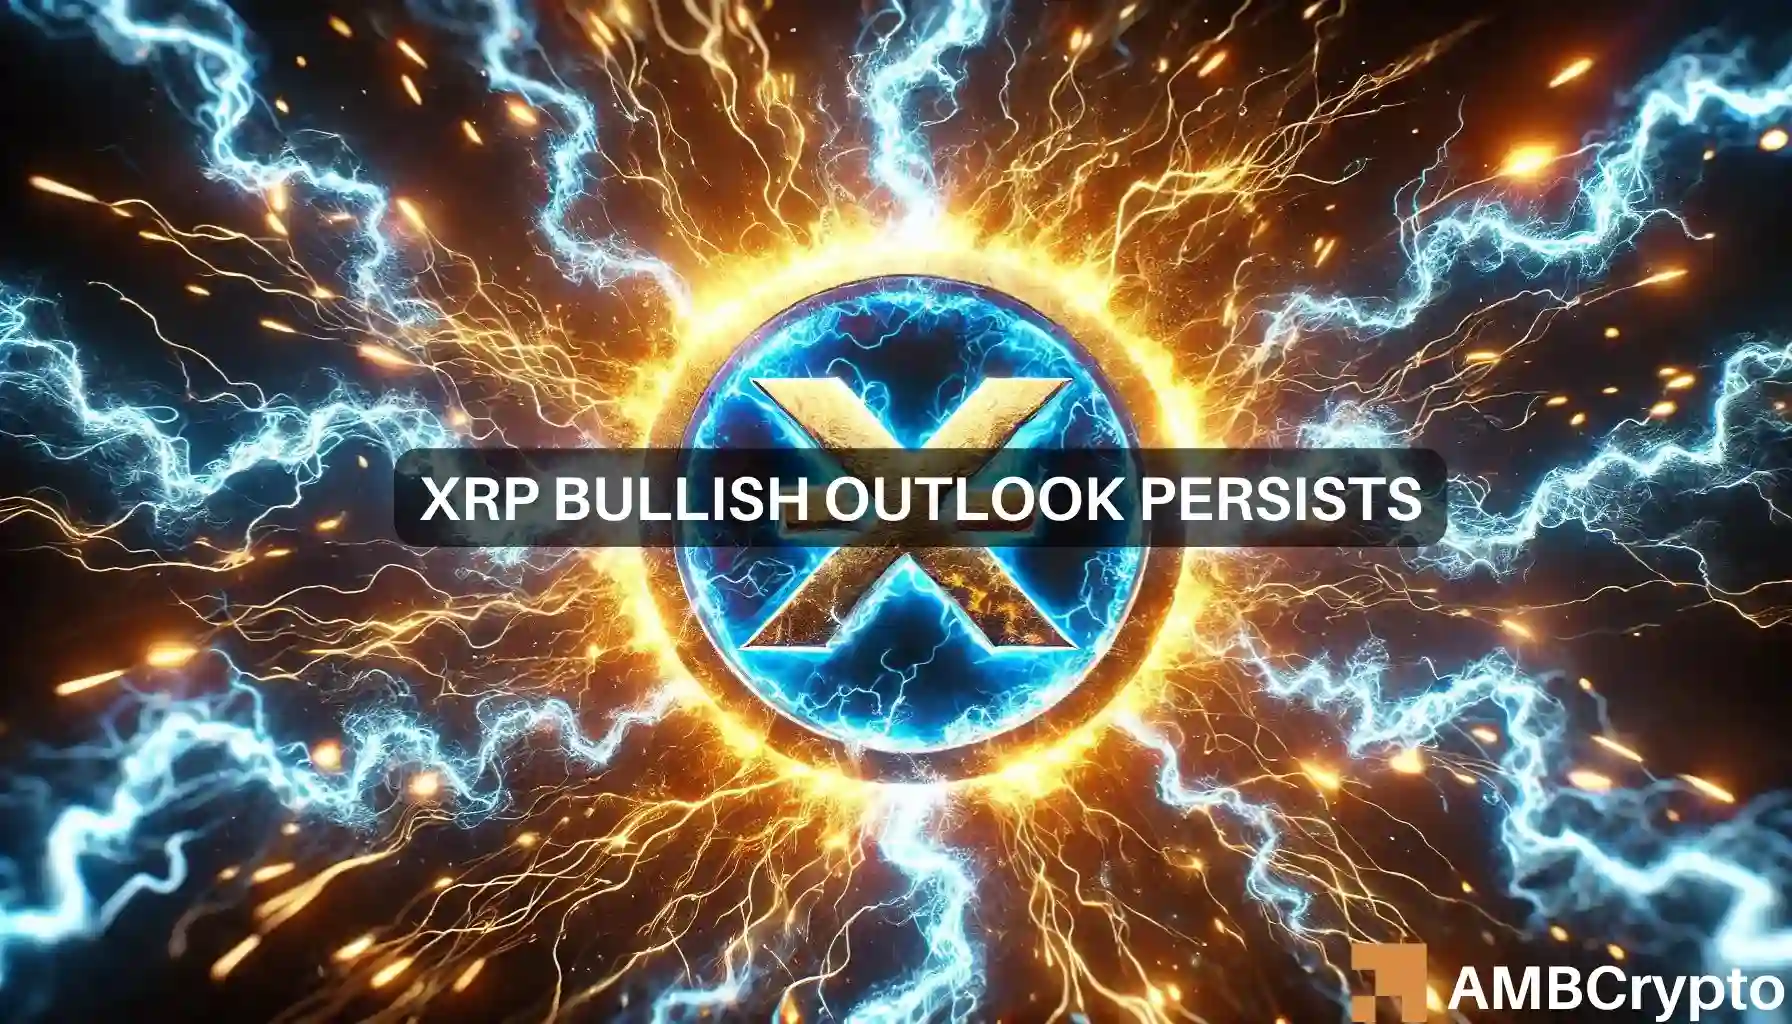 XRP Likely to Consolidate Before Next Bullish Surge